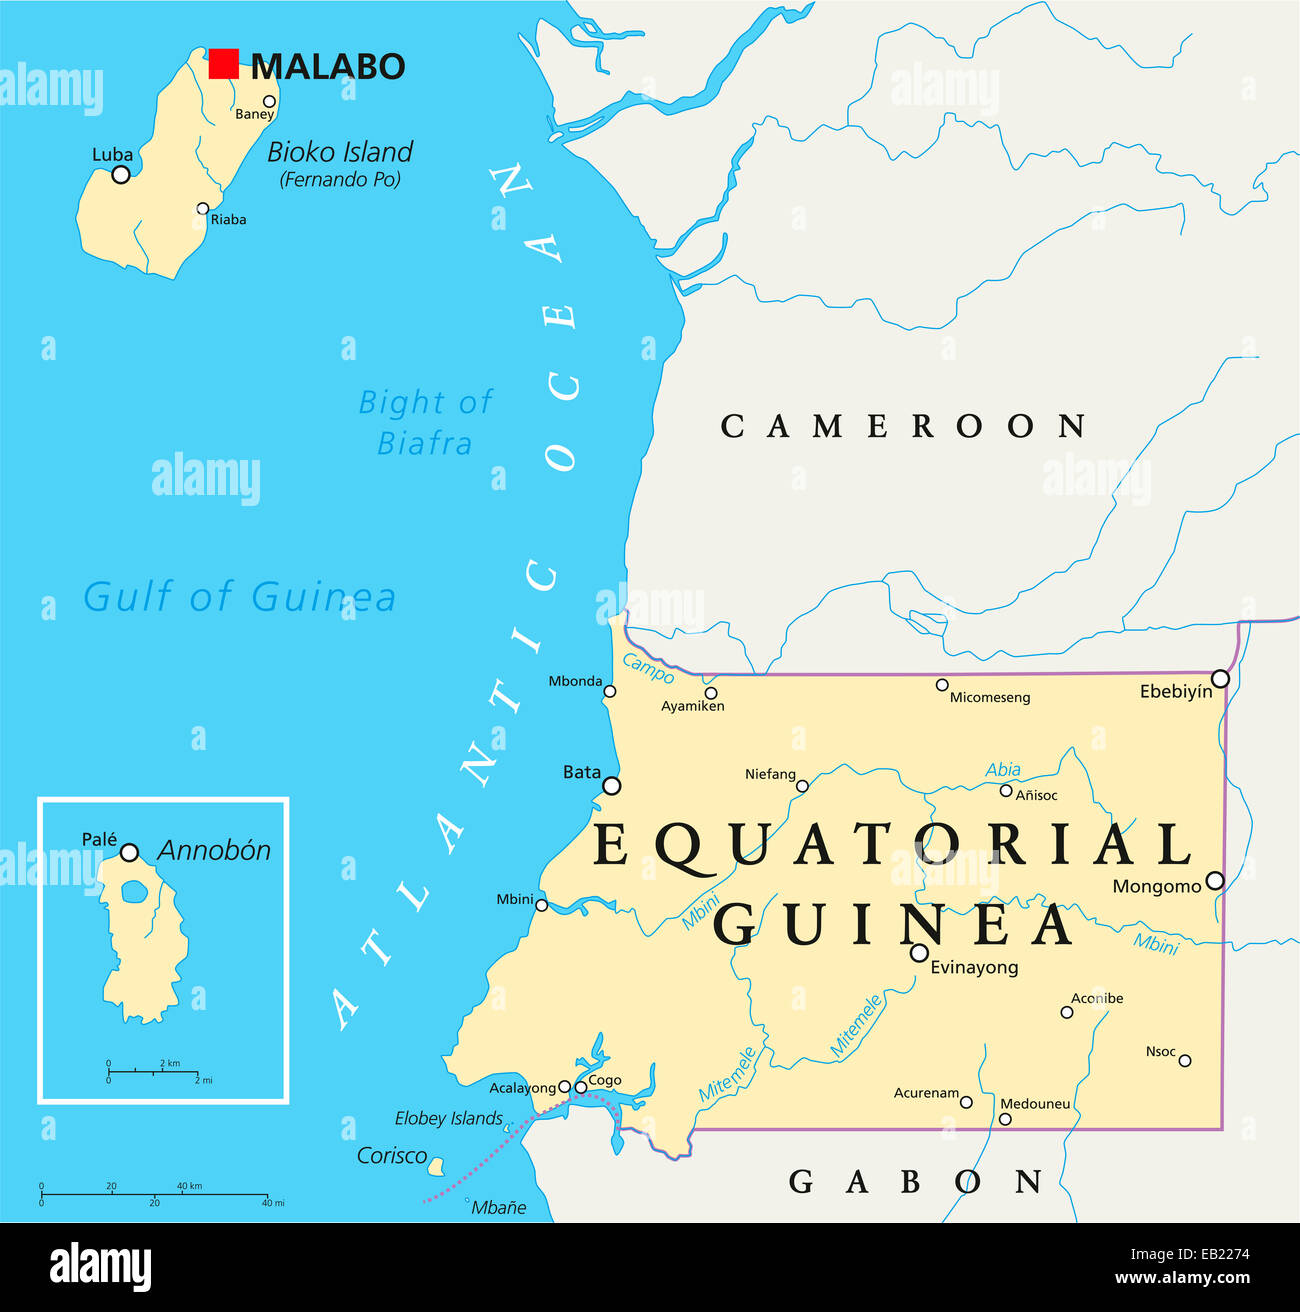 Equatorial Guinea Political Map with capital Malabo, national borders, important cities and rivers. English labeling and scaling Stock Photo